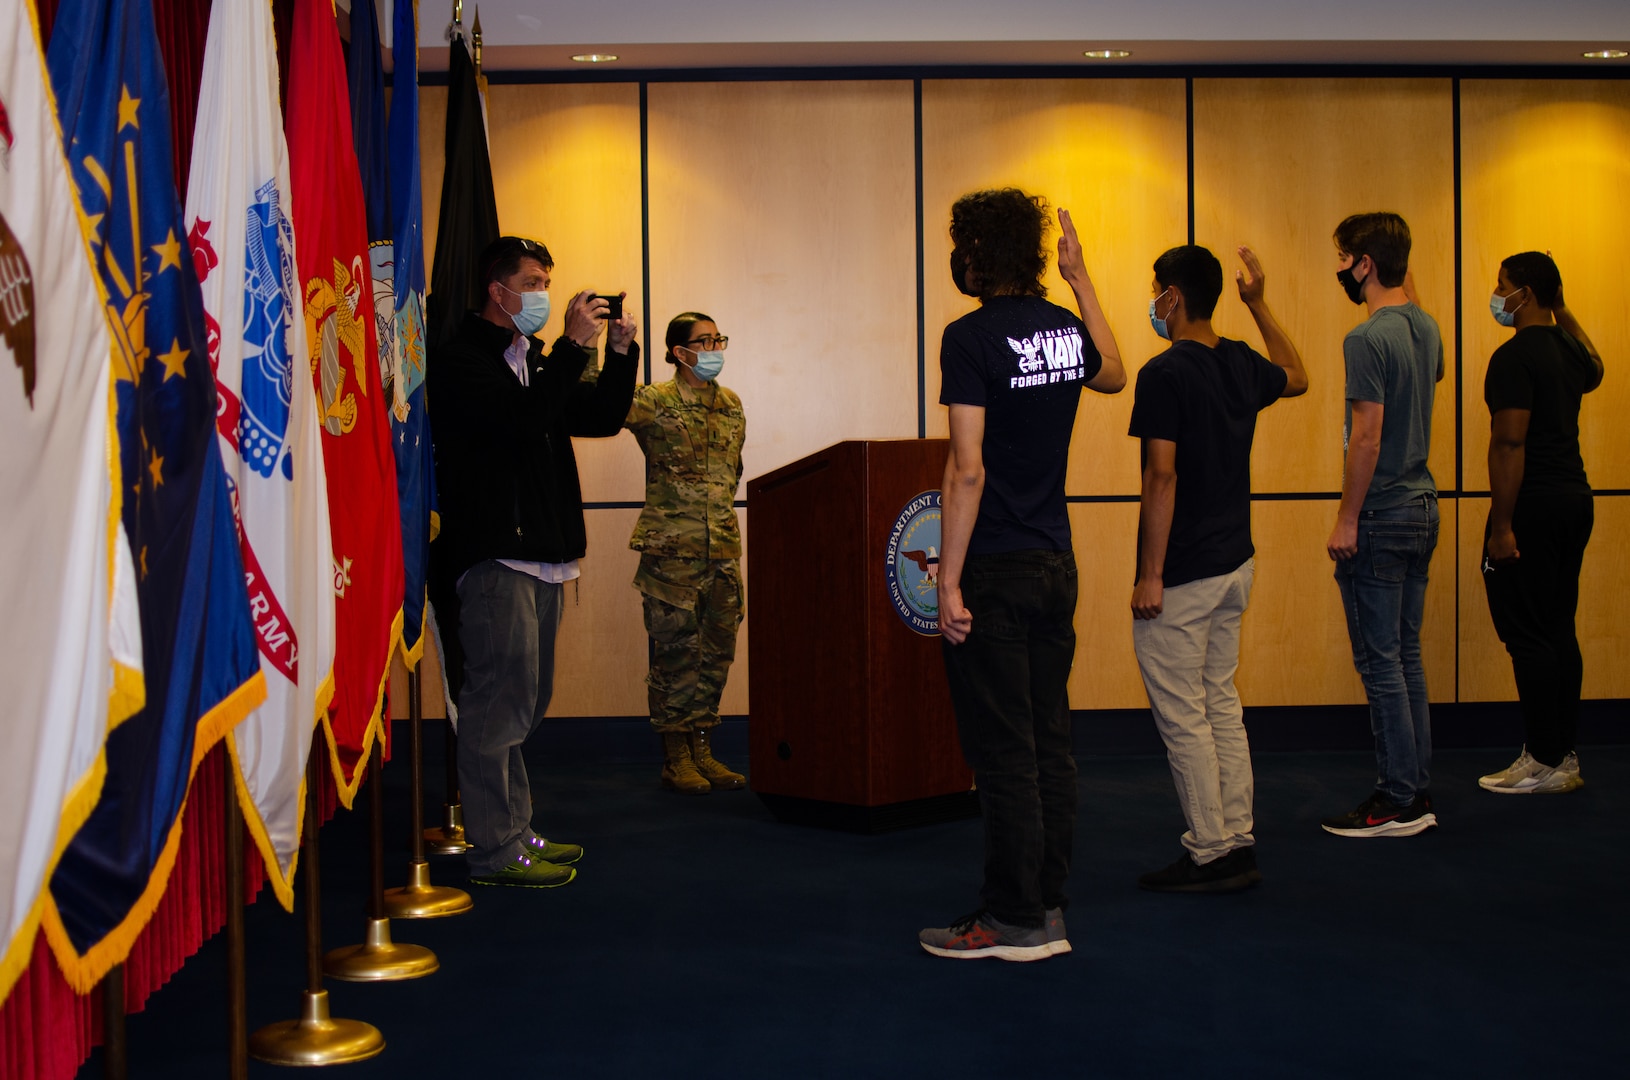 Applicants take the oath of enlistment at Chicago MEPS July 14.